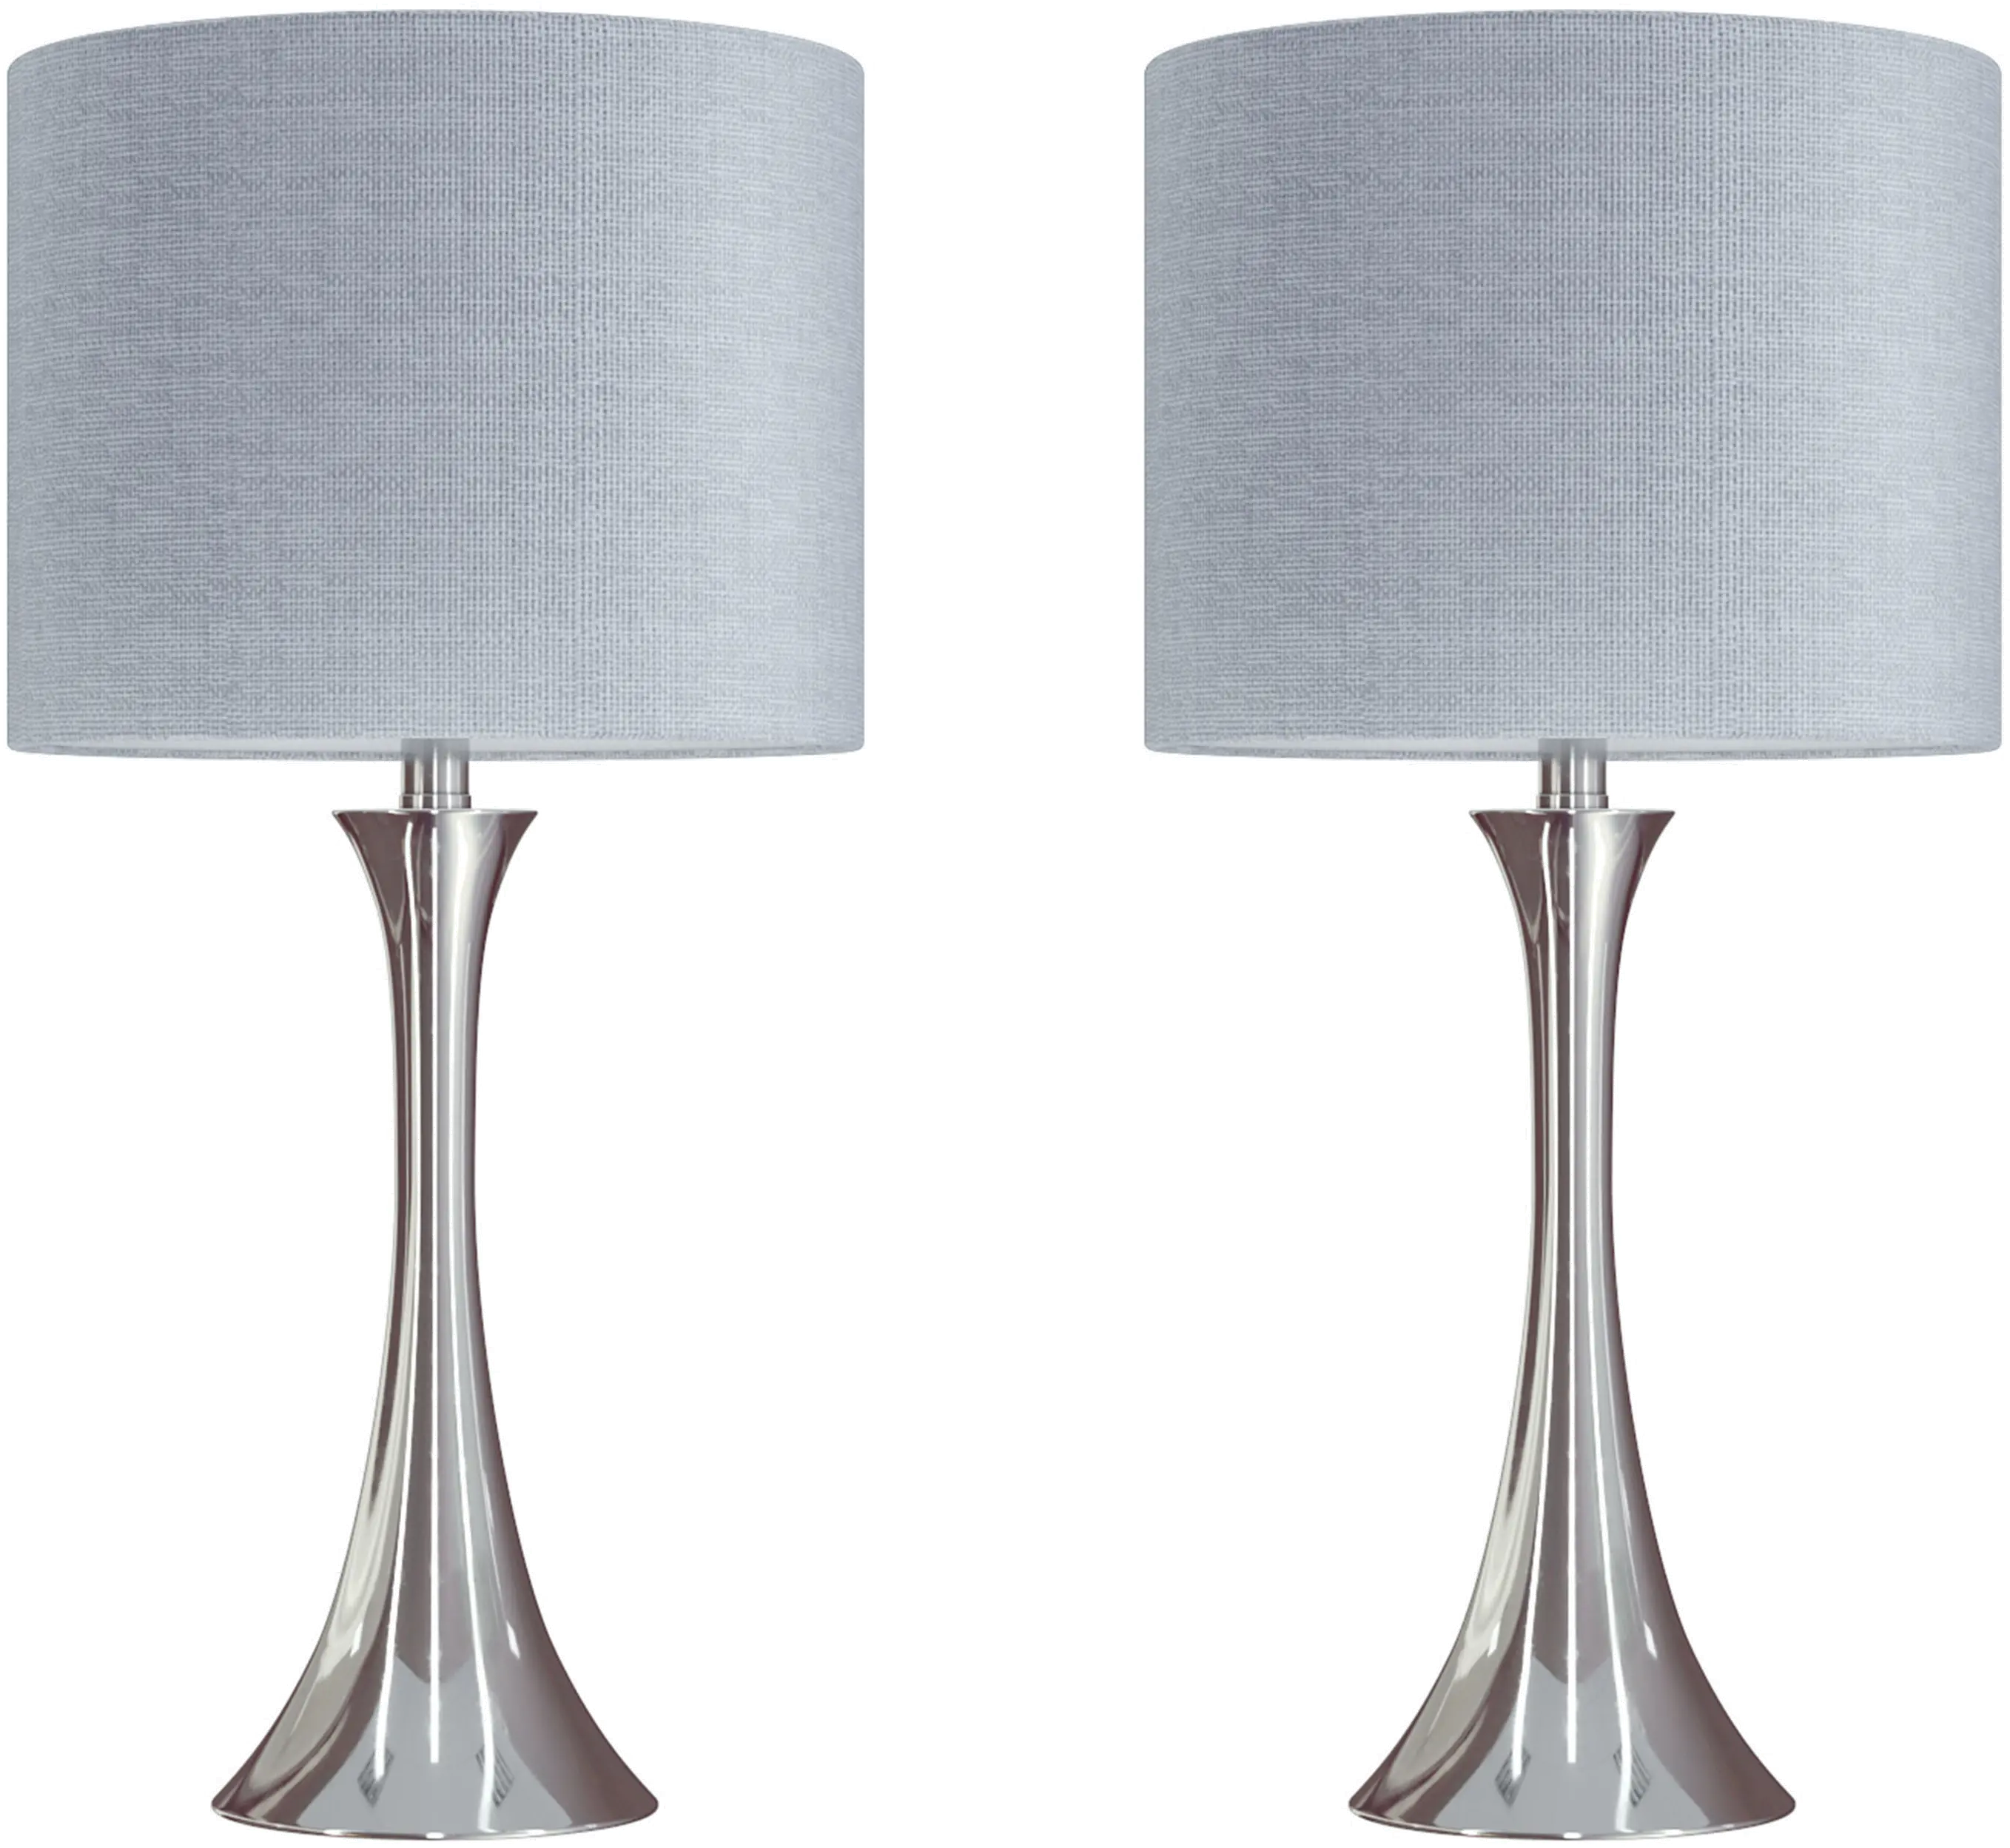 TL24-LENUXE-DBLNILGY2 Lenuxe Polished Nickel Table Lamps with Sparkly Gr sku TL24-LENUXE-DBLNILGY2